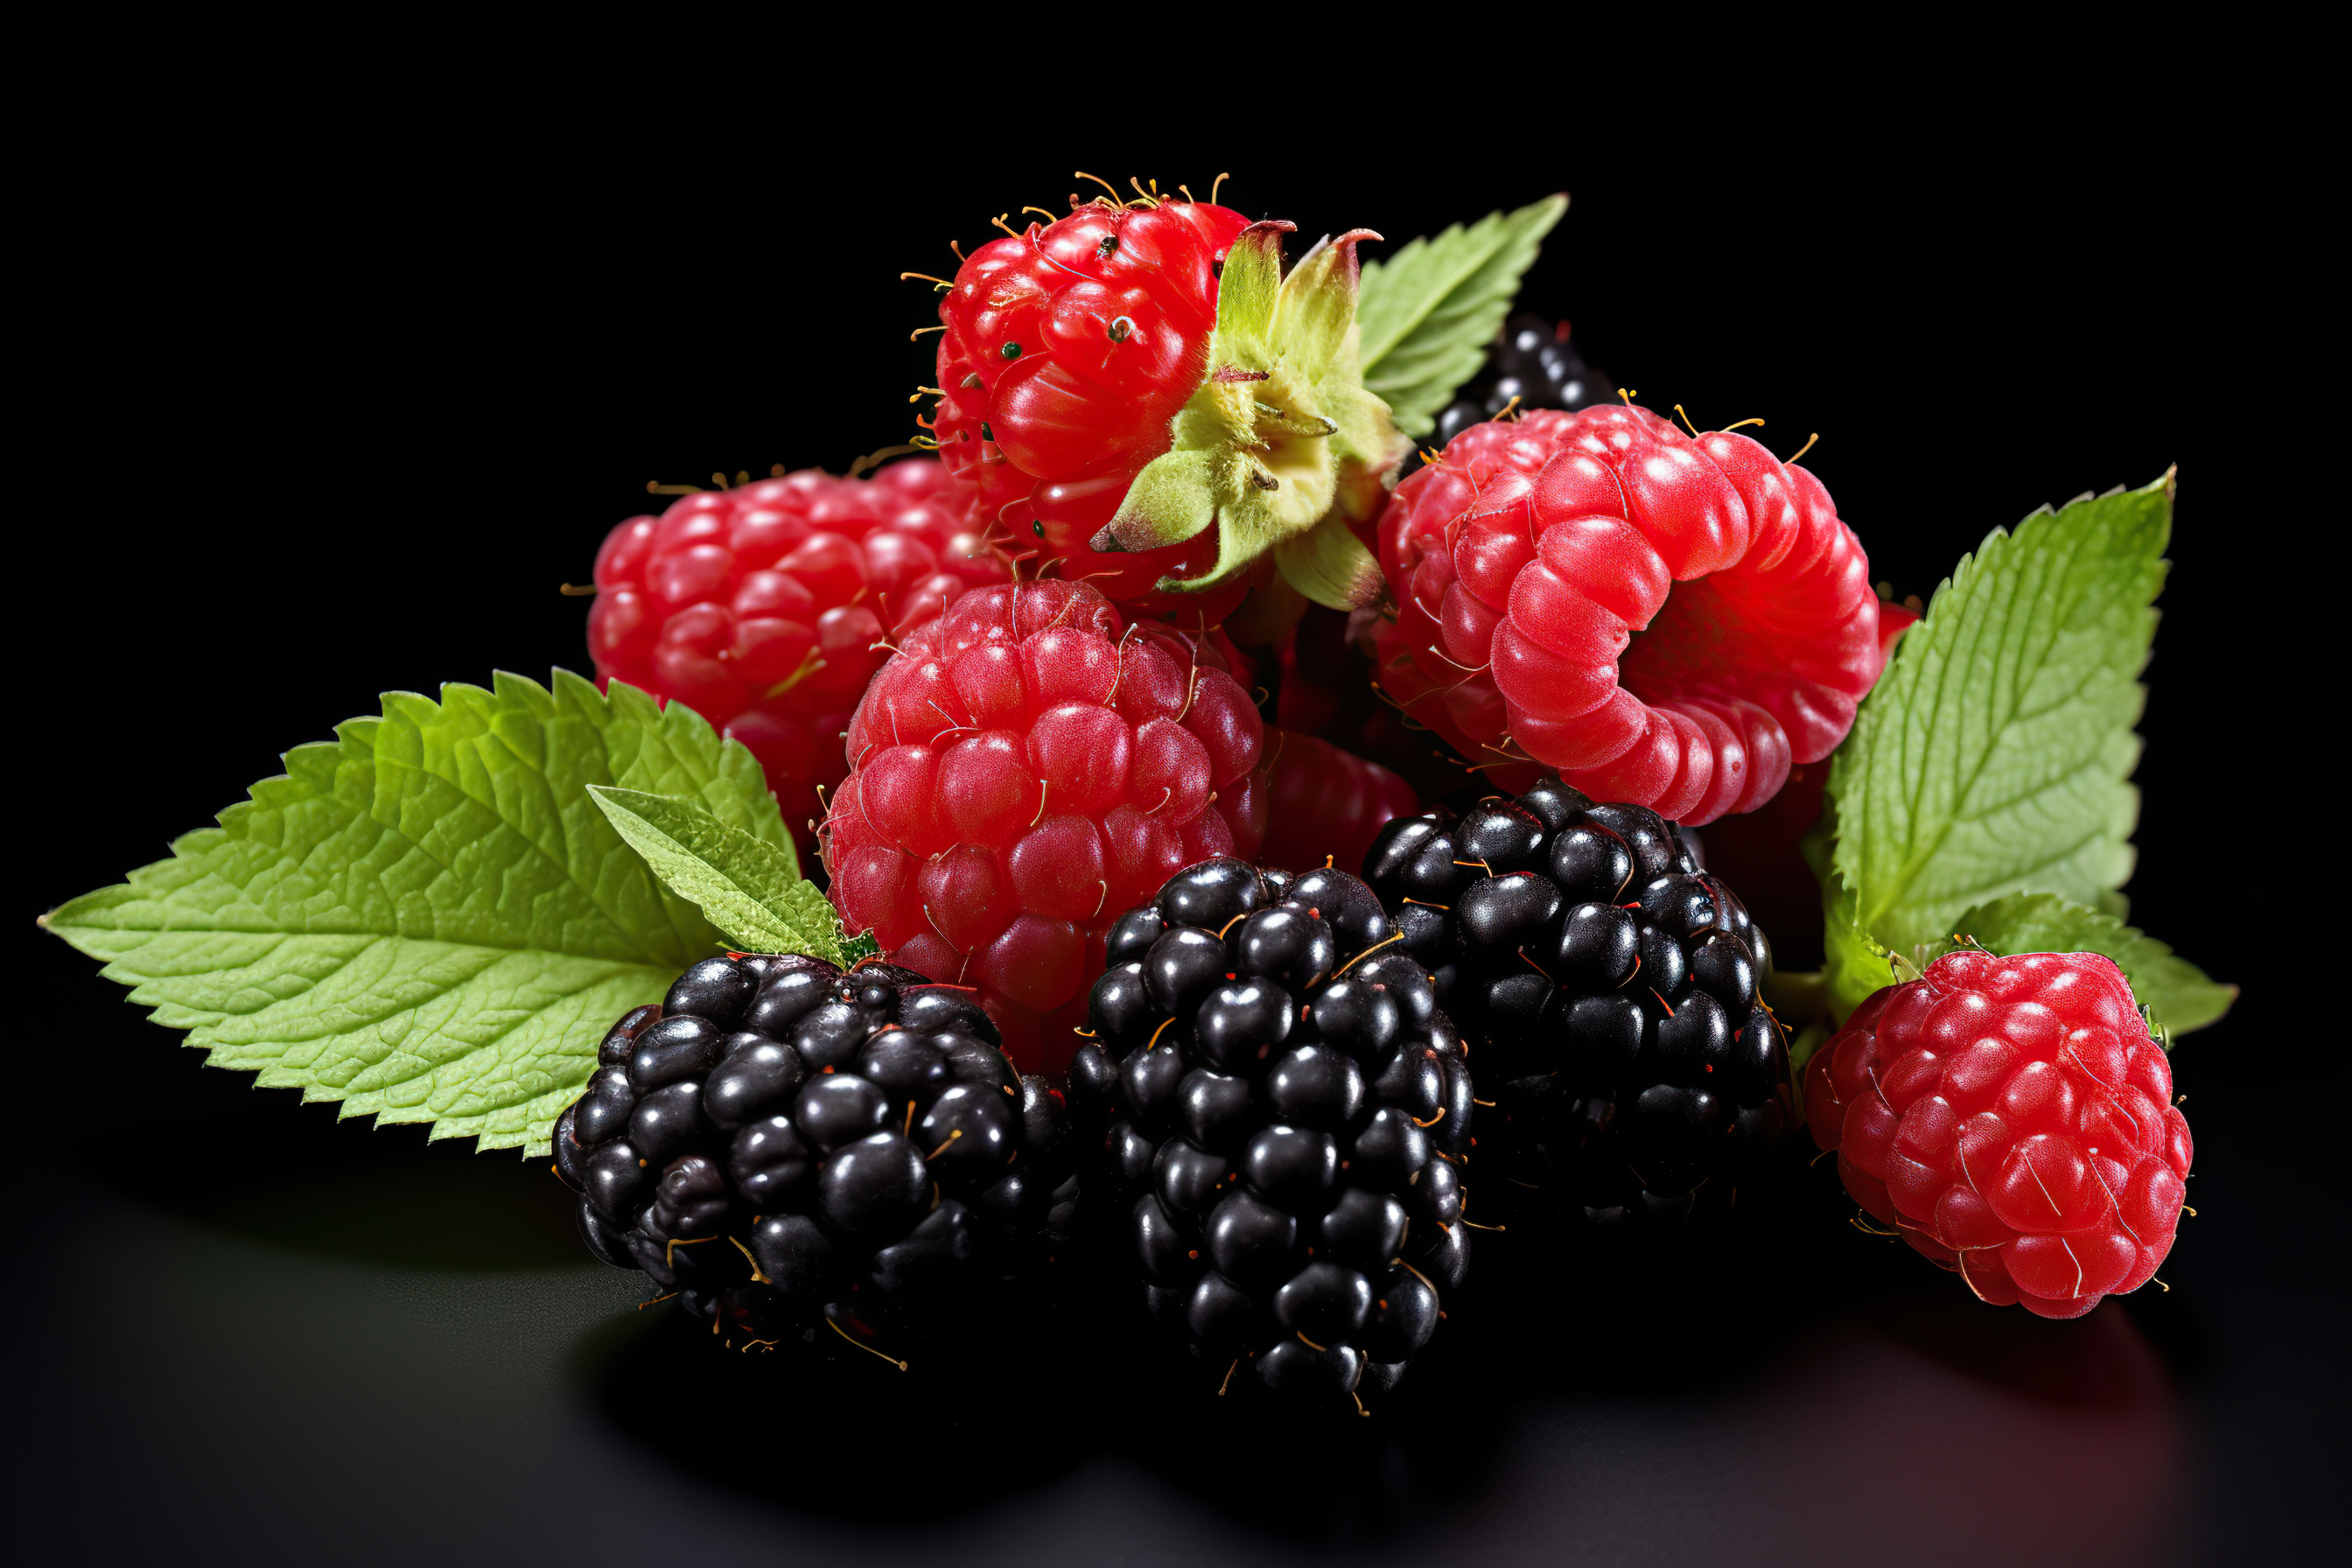 Close-up view of mixed, assorted berries blackberry, strawberry, blueberry, raspberry with green leave isolated on black background. Colorful and healthy concept. Black, blue, red, green colo